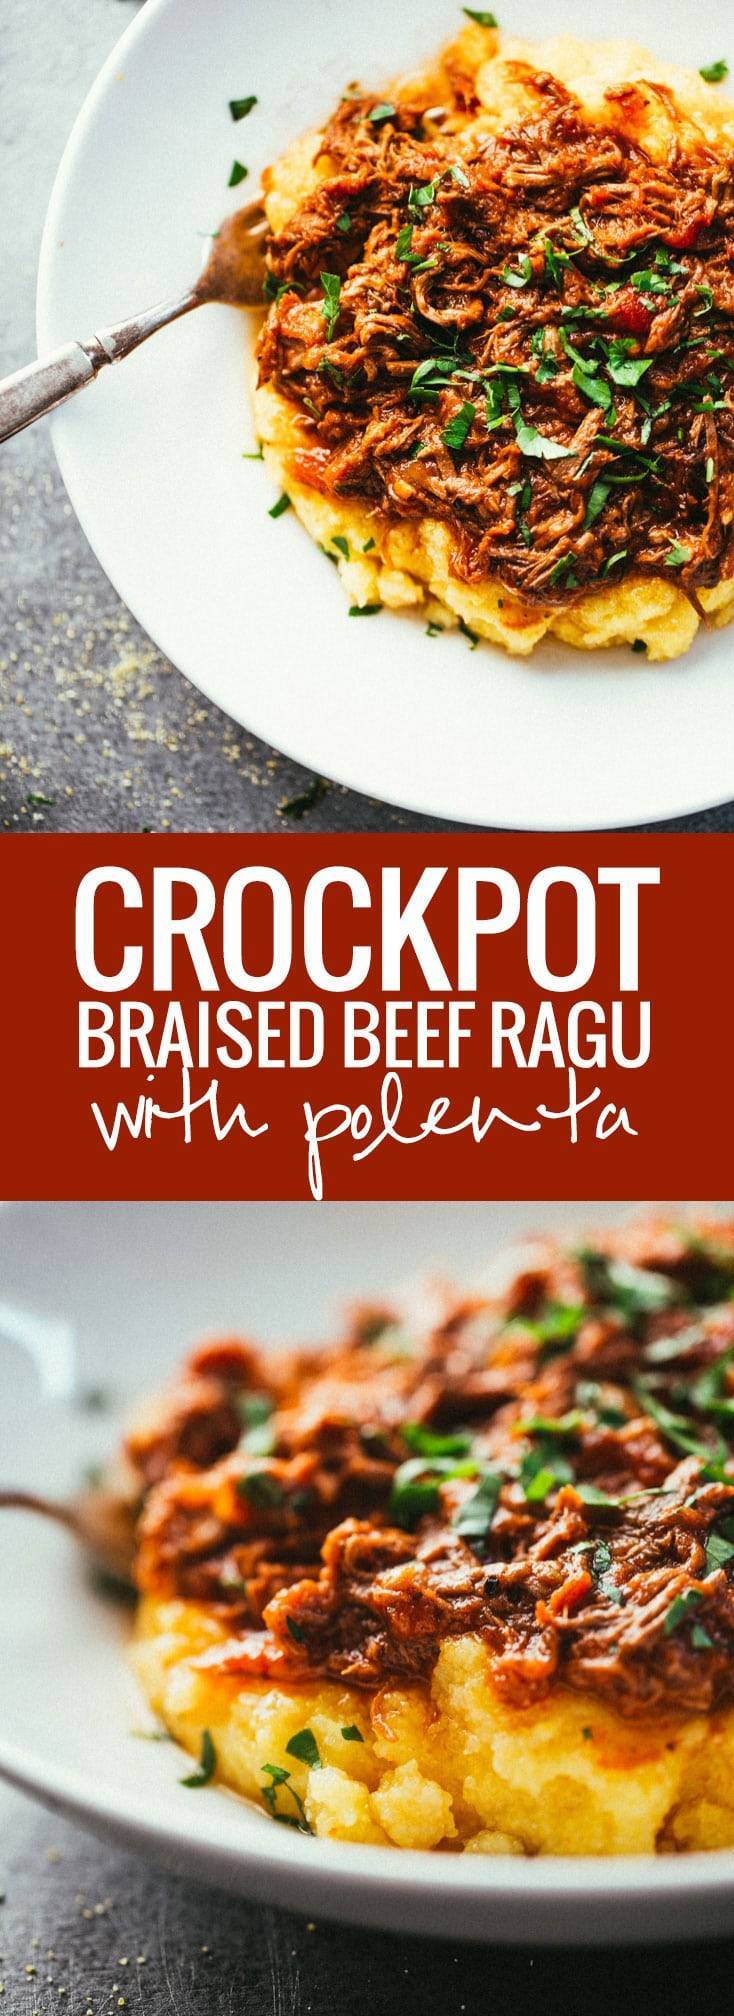 Crockpot Braised Beef Ragu with Polenta - super easy to make and perfect for winter weeknights!